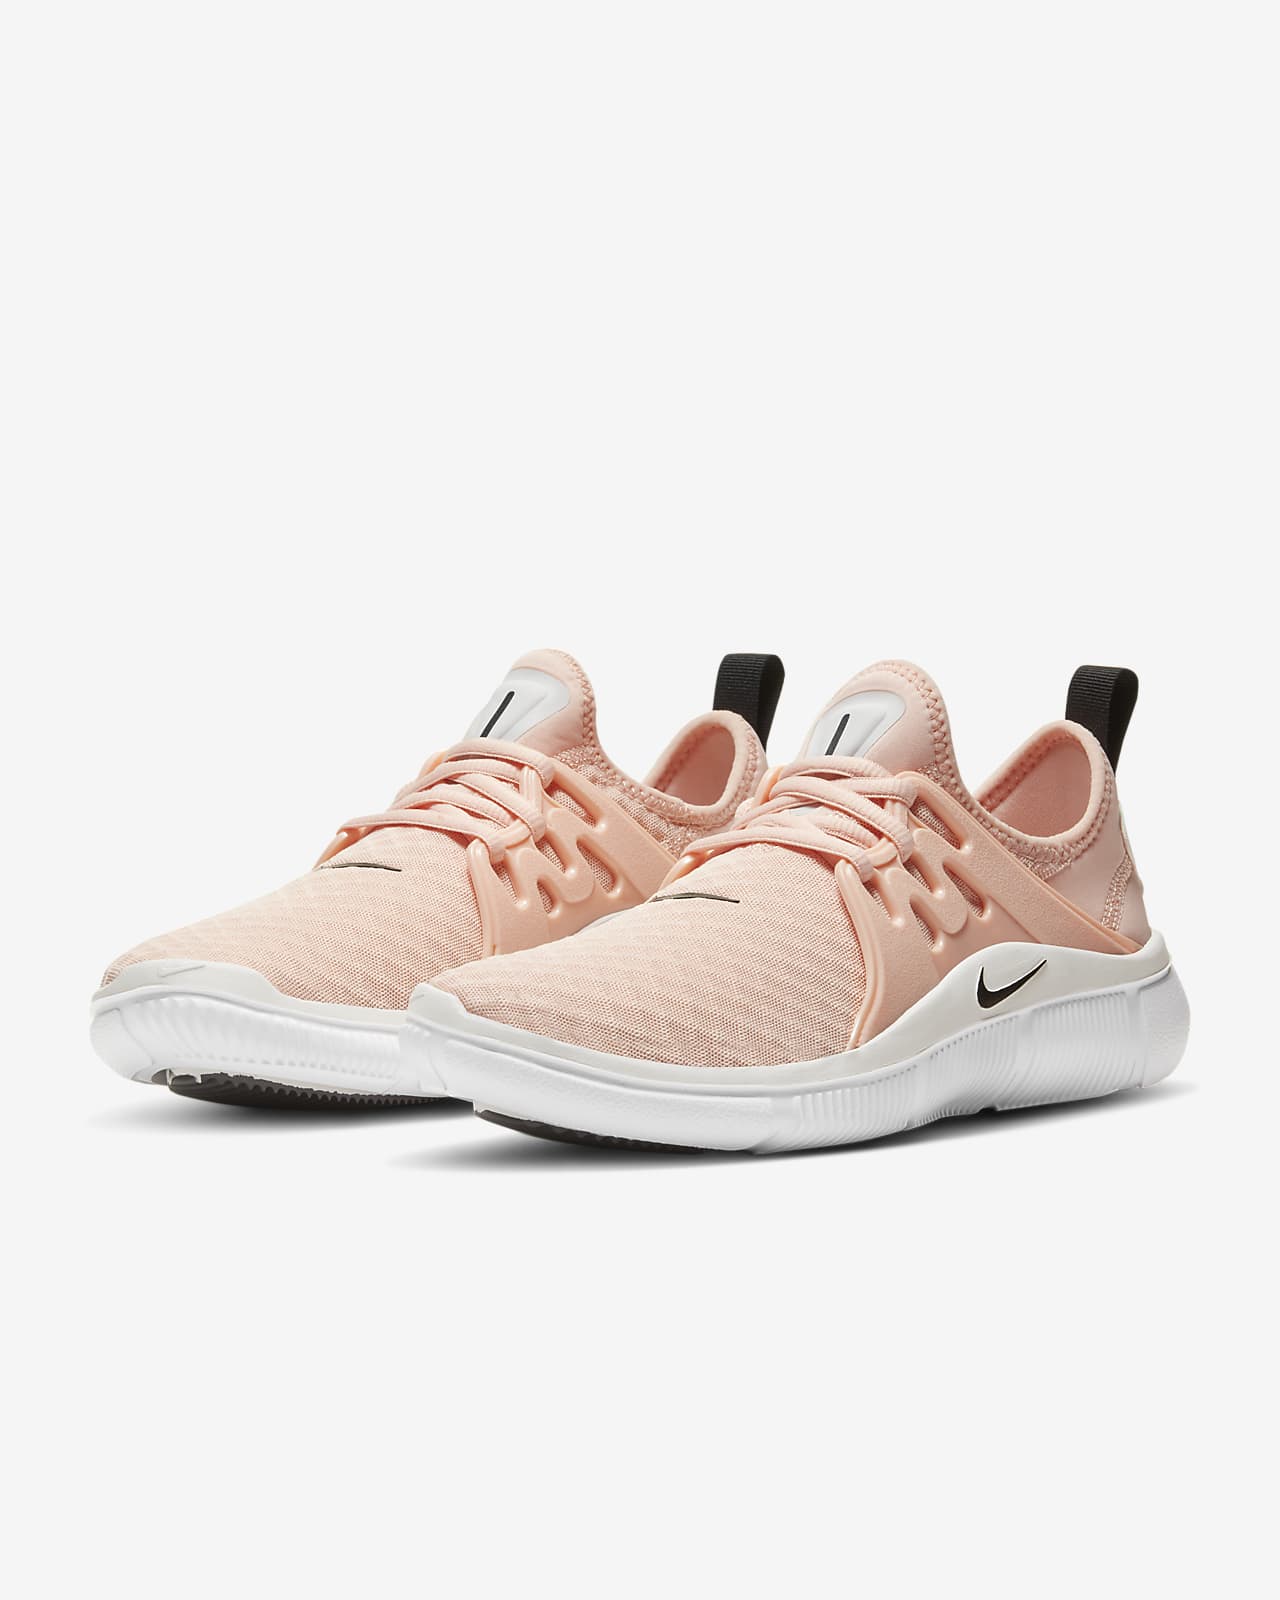 nike women's shoes official site